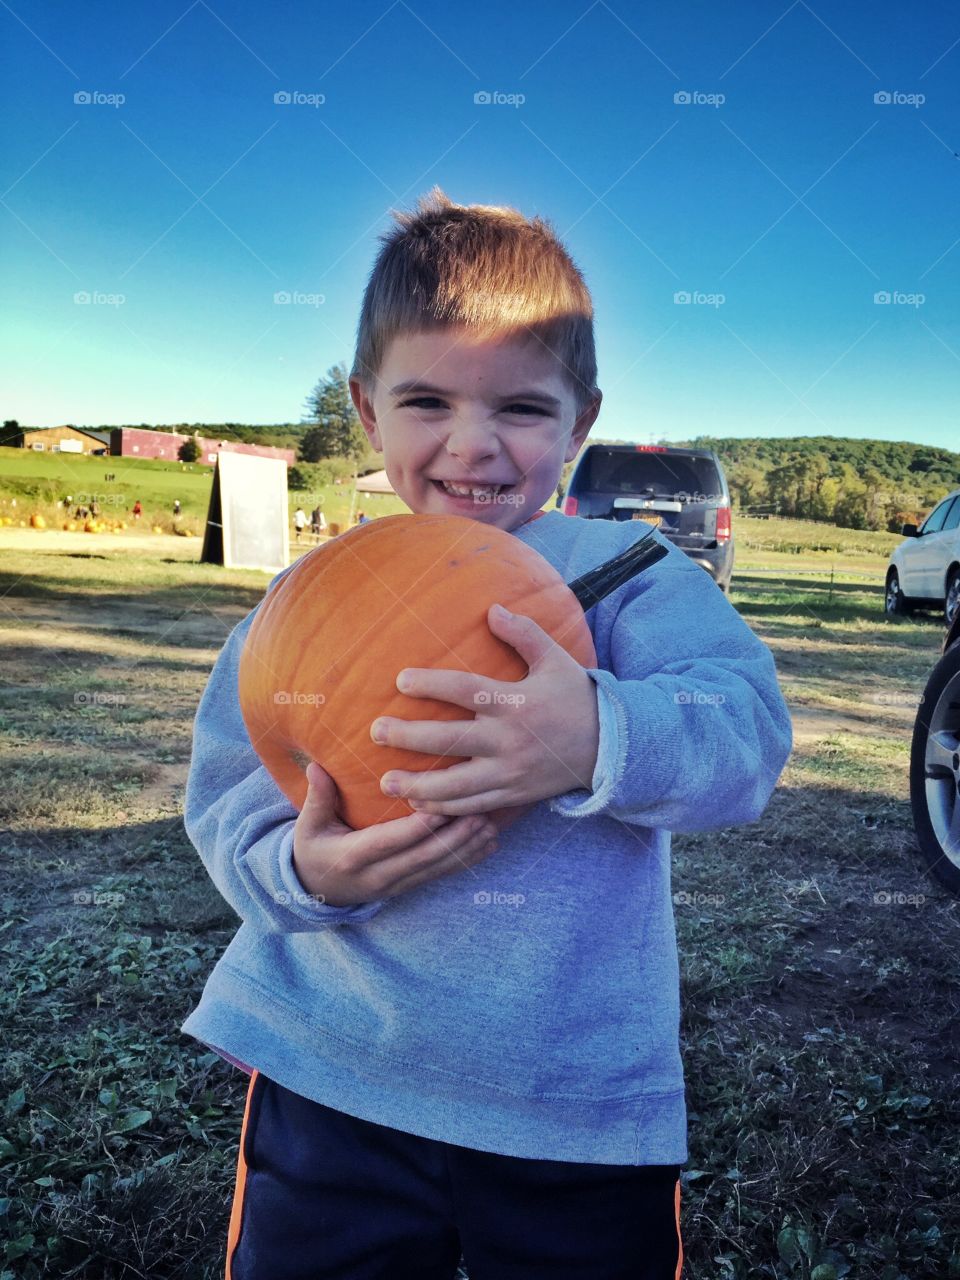 Pumpkins. Took my son pumpkin picking in upstate New York. His favorite thing to do! He loved choosing his own.